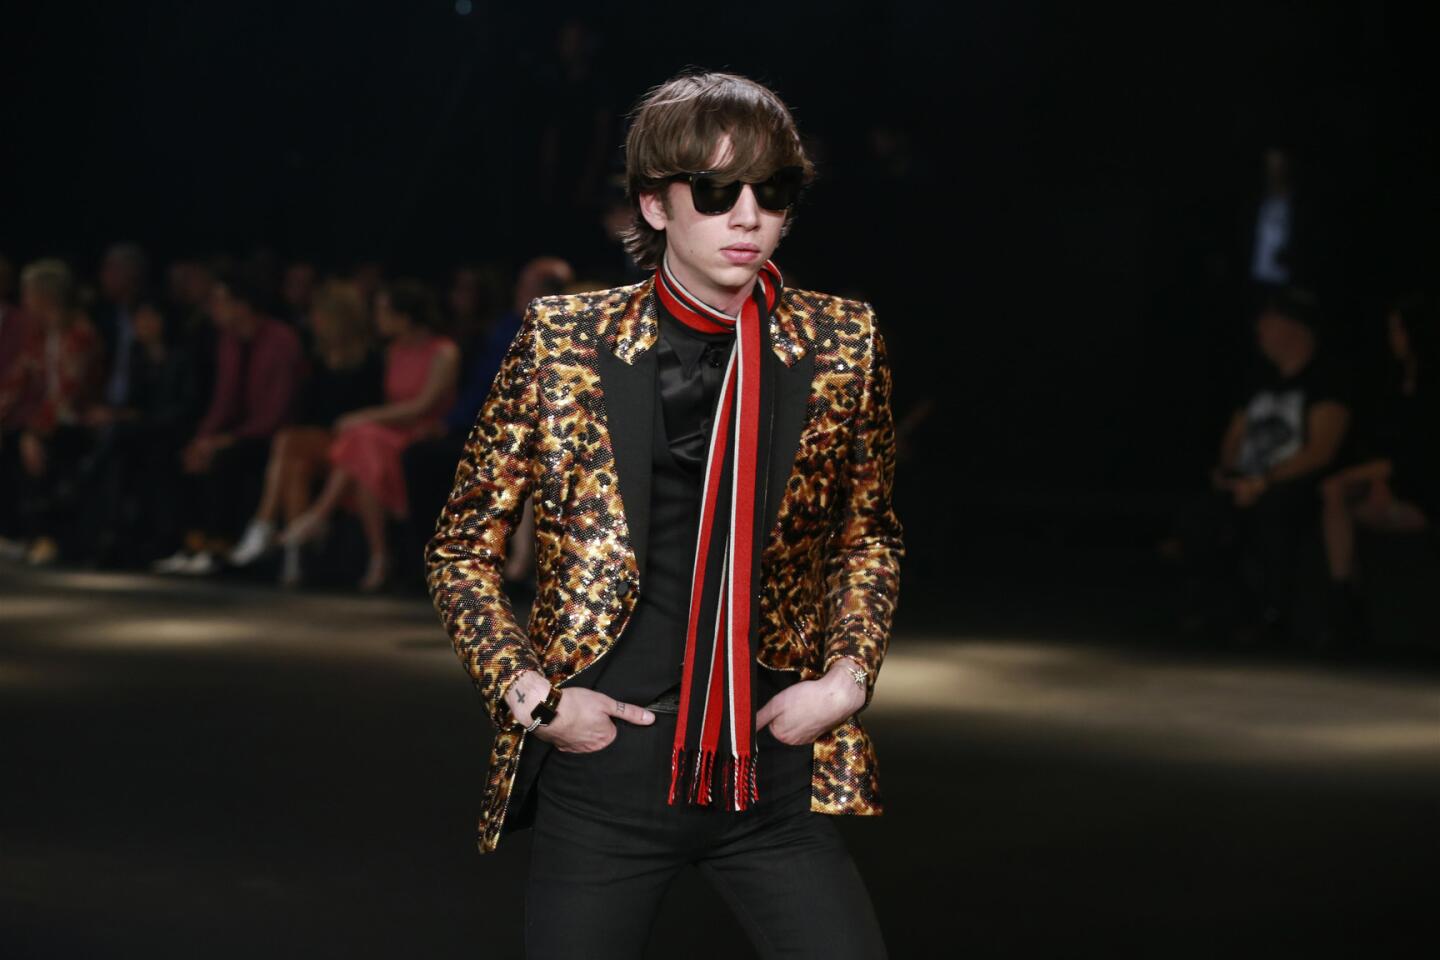 Saint Laurent's Hedi Slimane rocks the L.A. runway with retro-glam zeal -  Los Angeles Times